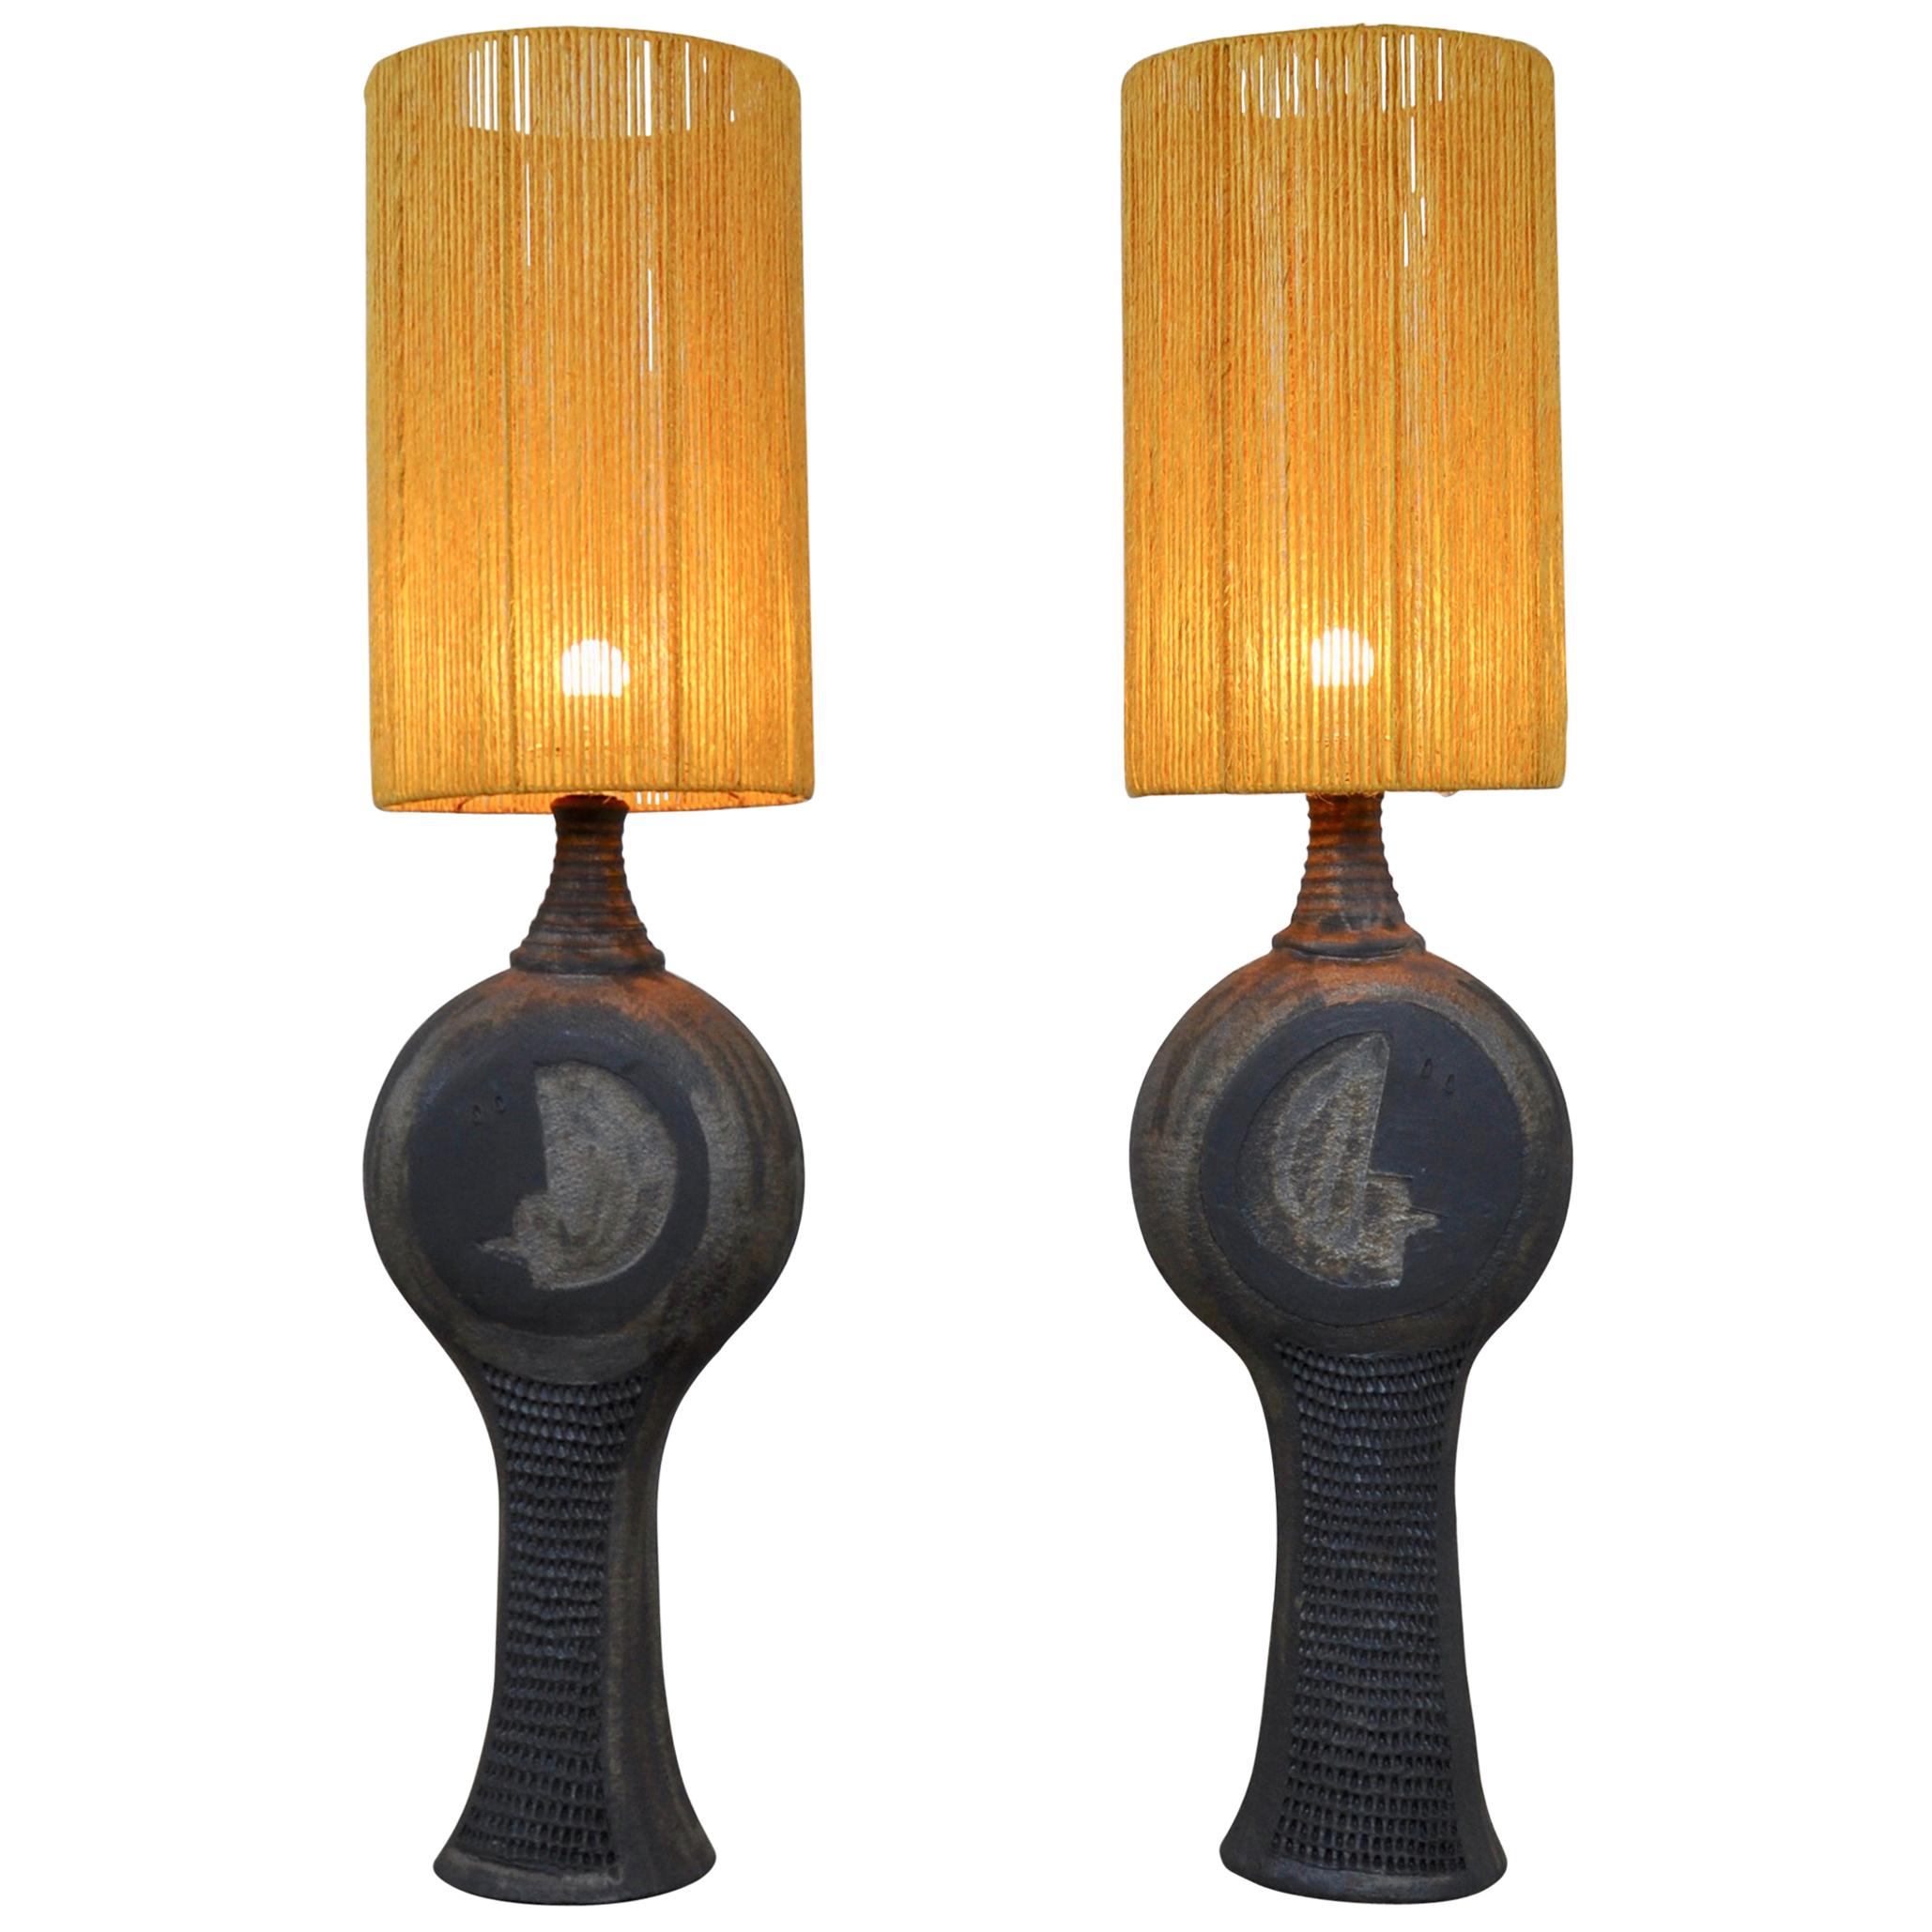 Pair of Table Lamp by Dominique Pouchain